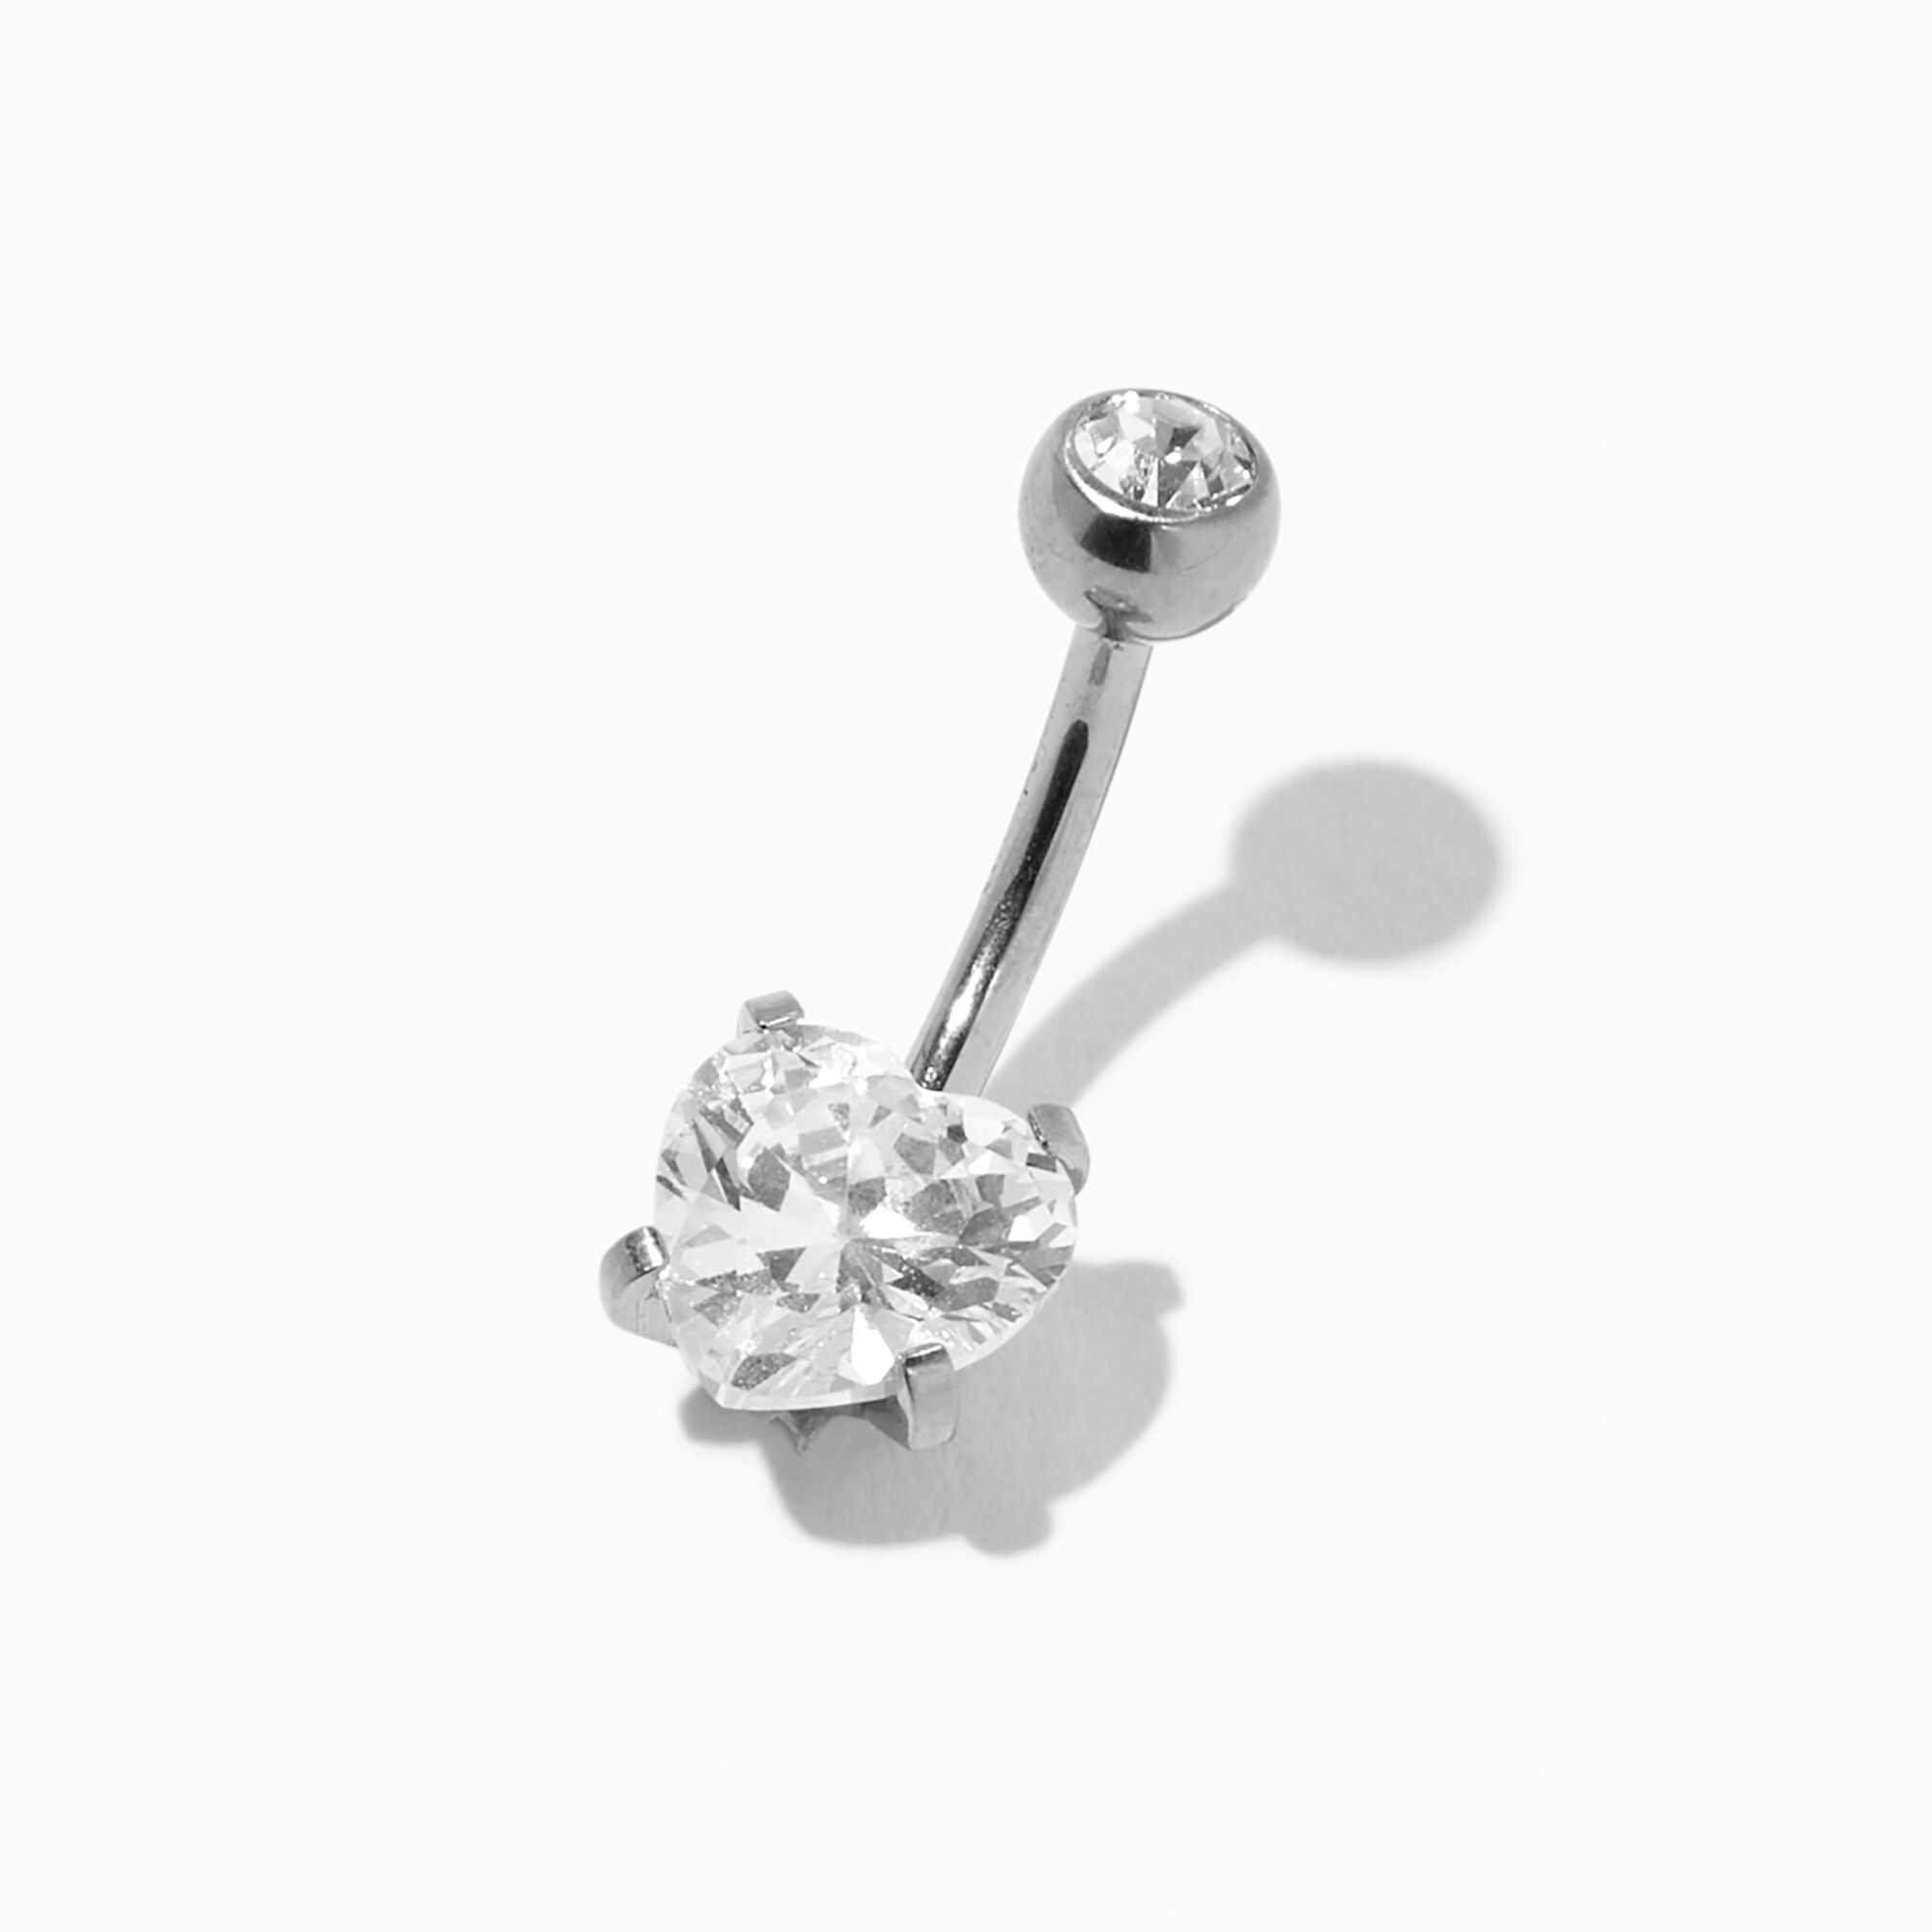 View Claires Titanium 14G Heart Crystal Belly Bar Silver information